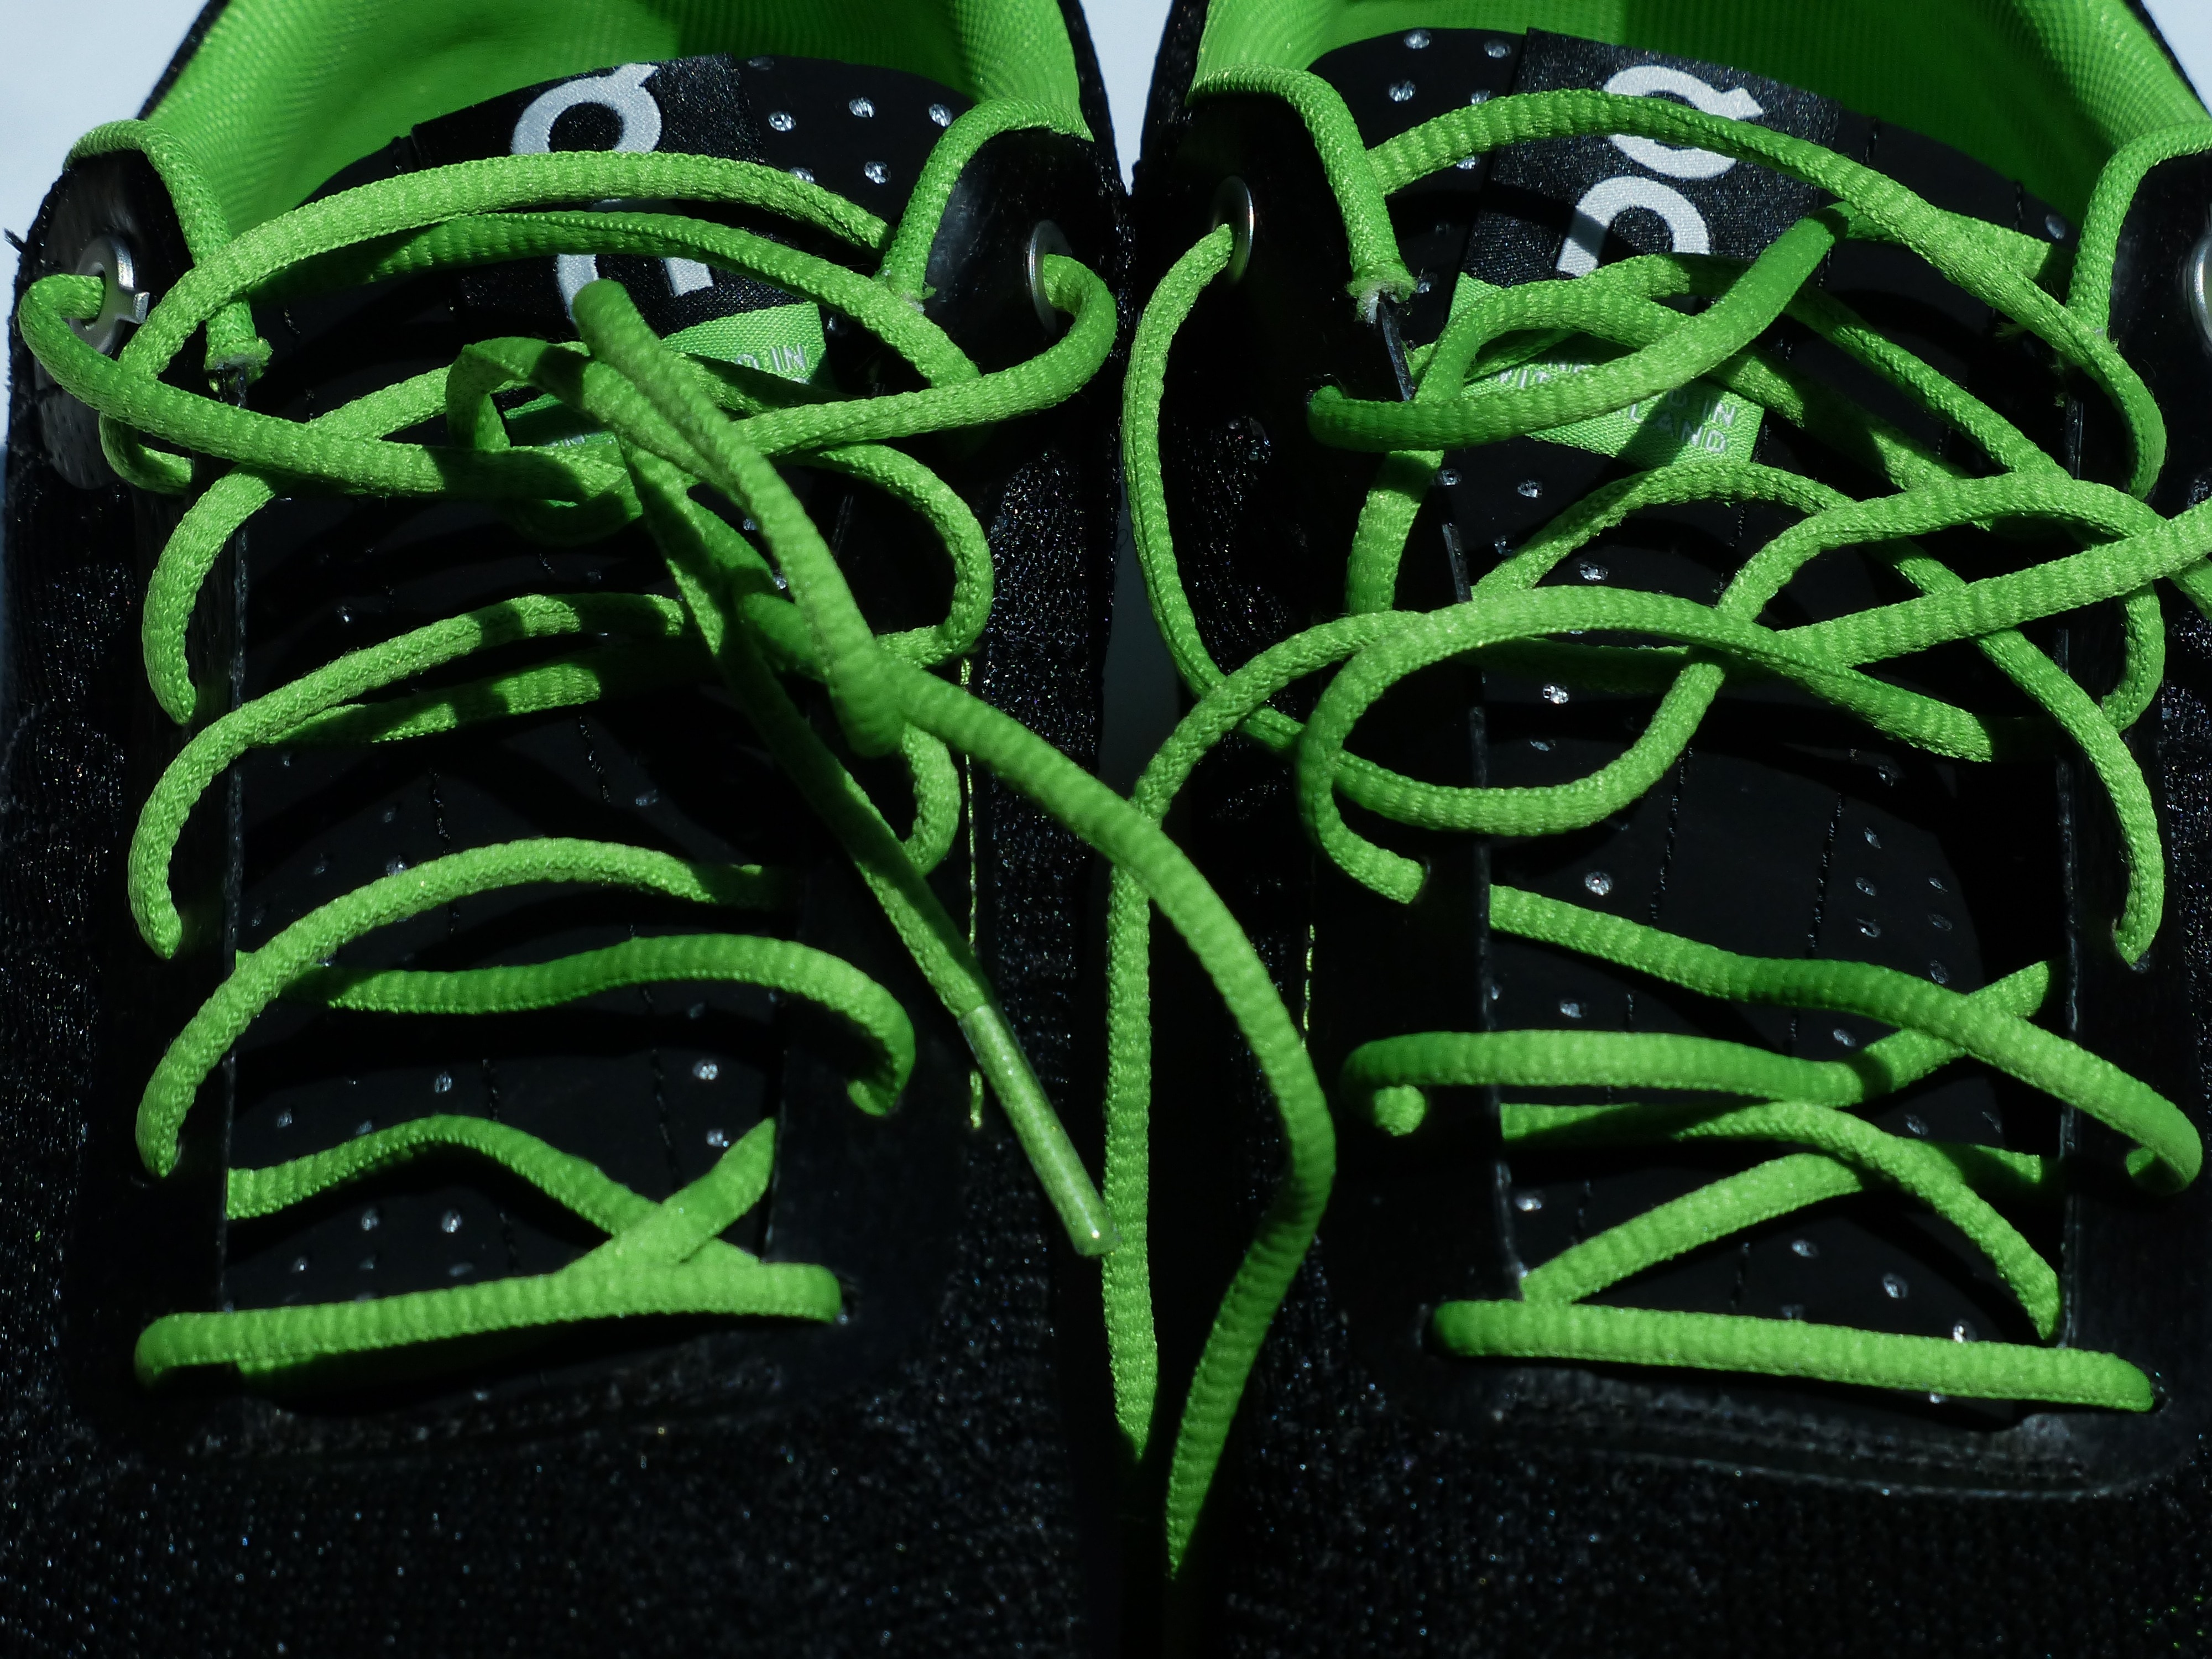 1920x1080 wallpaper | black-and-green shoes | Peakpx